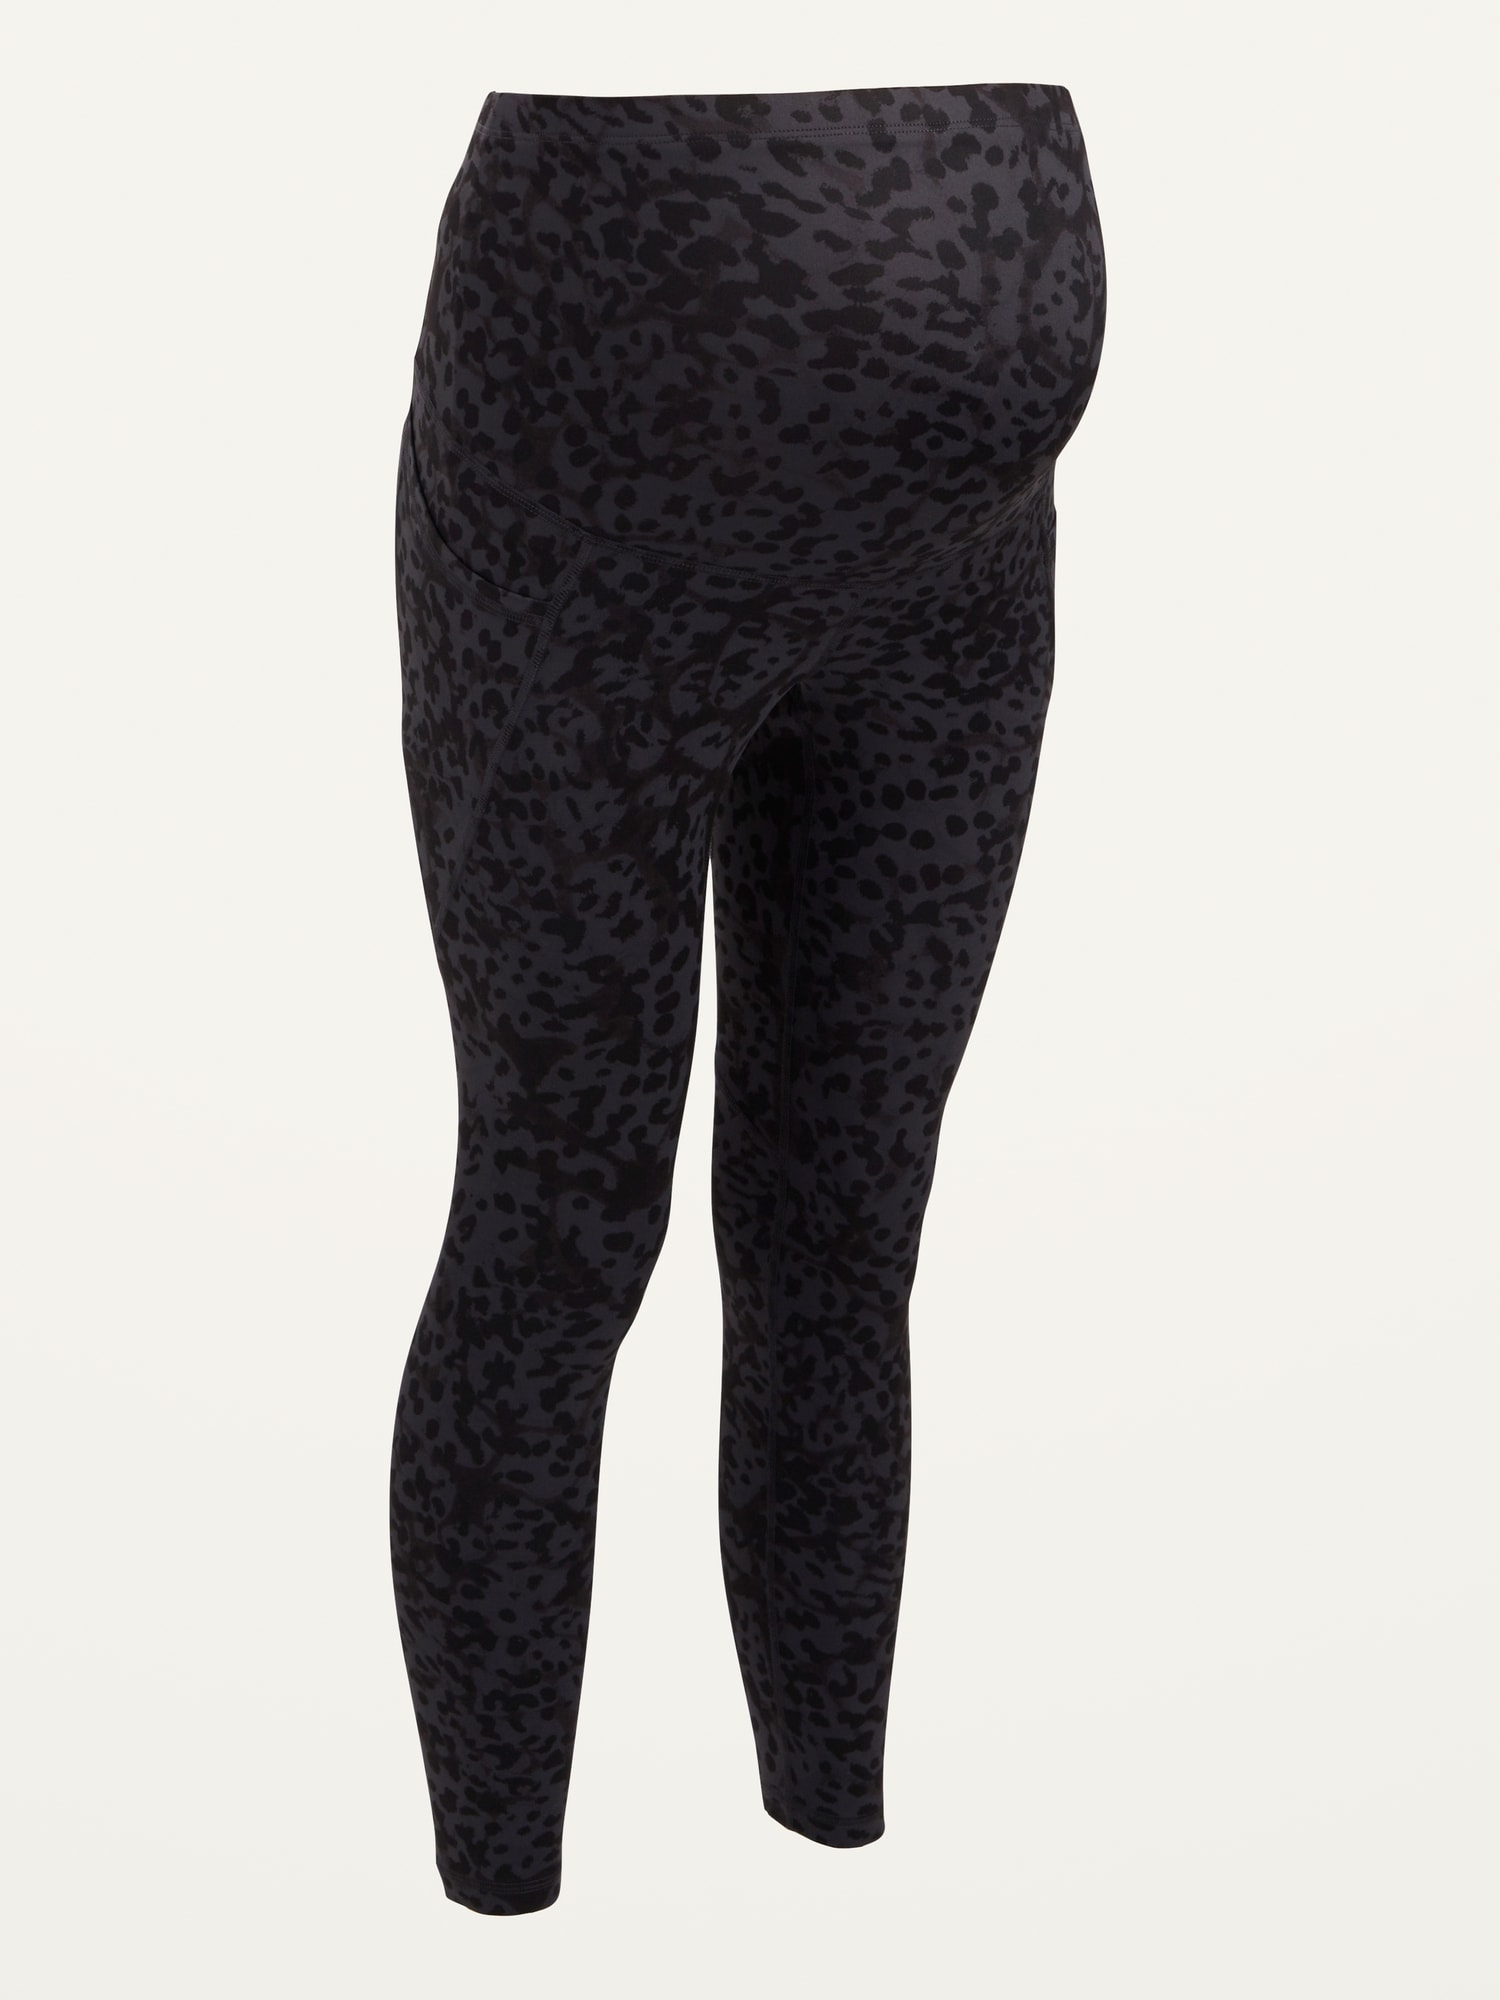 Black NWT XS Old Navy Maternity Front Low-Panel Leggings